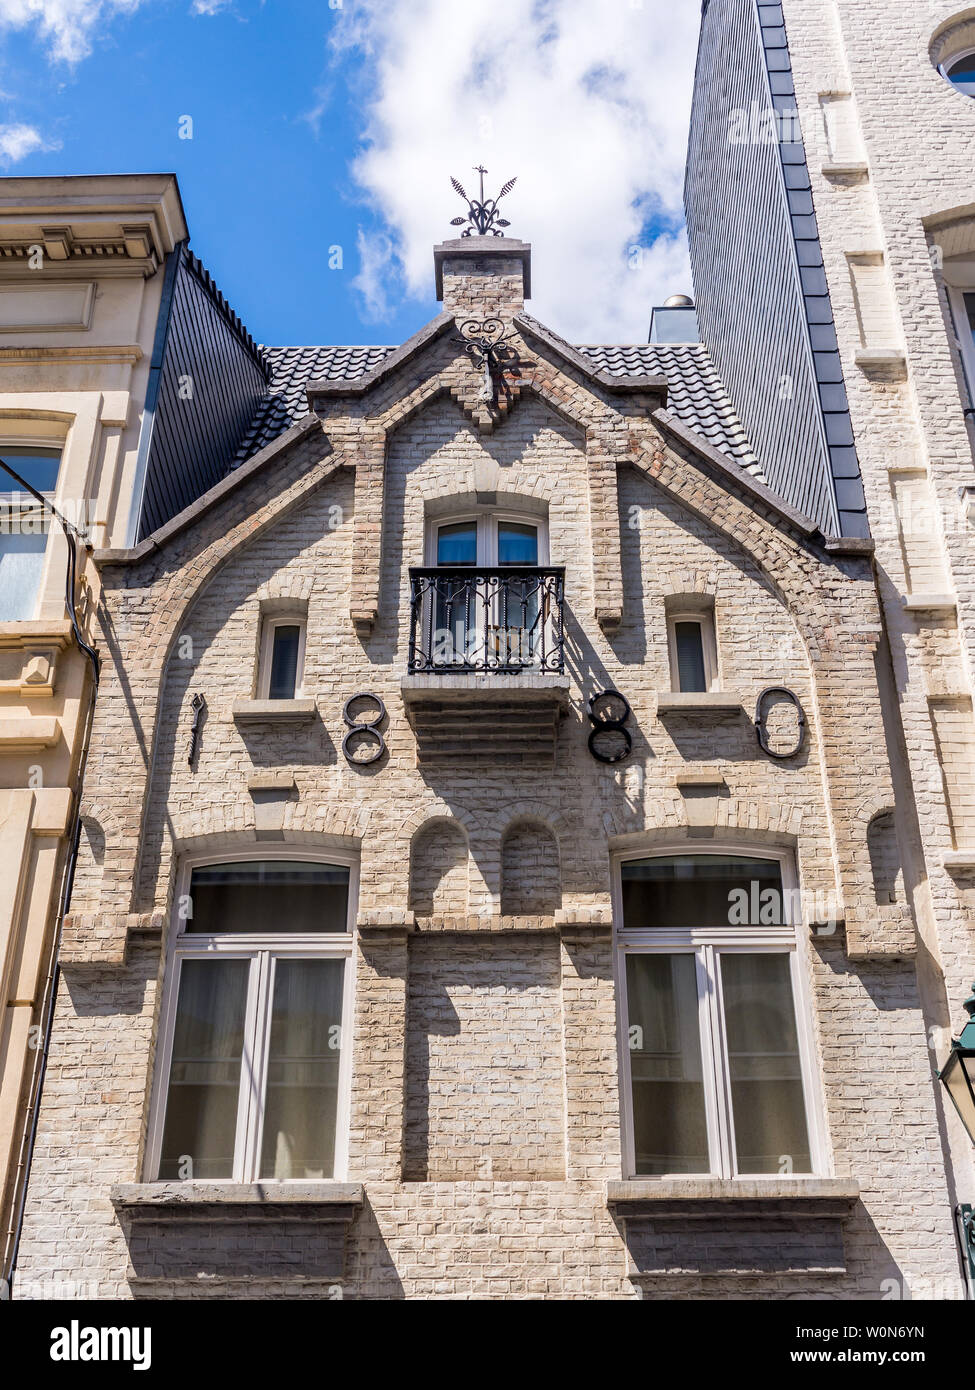 Stone building with 1880 construction date on facade - Brussels, Belgium. Stock Photo